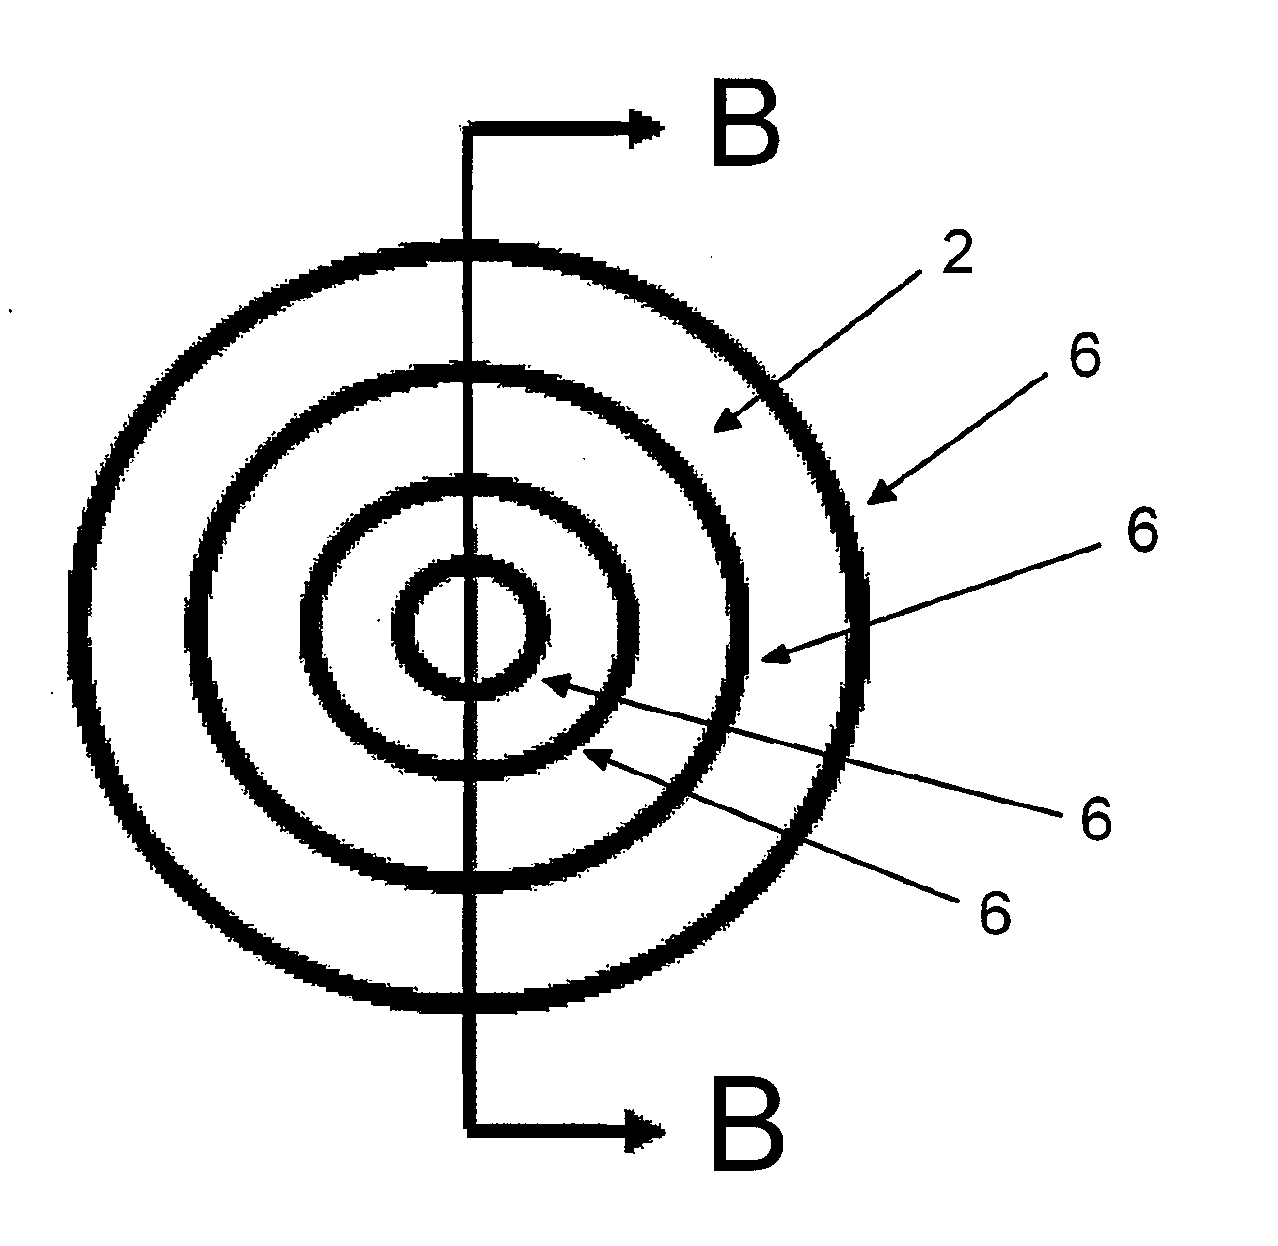 Method of constructing a tunable RF filter